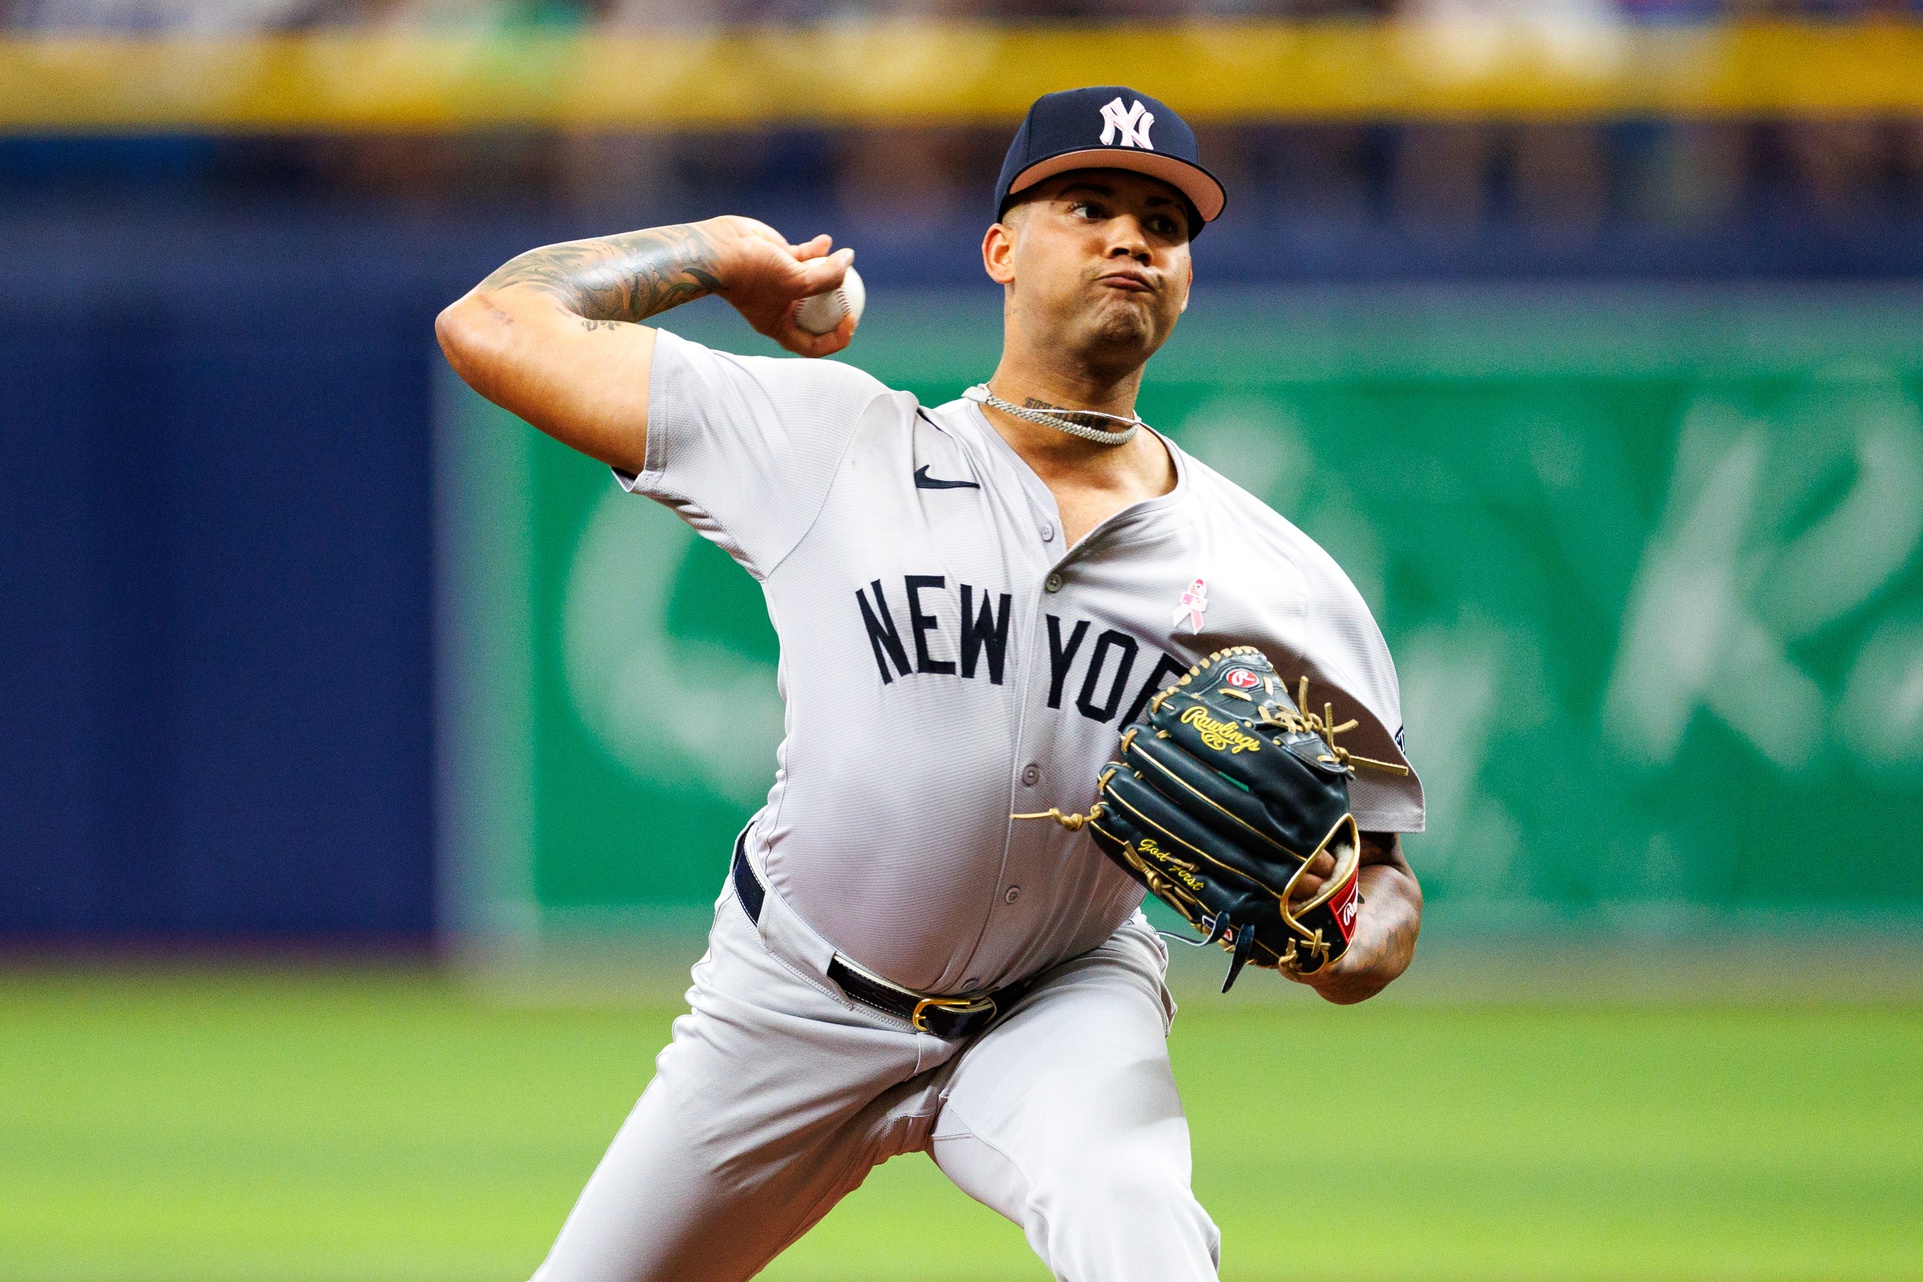 Luis Gil's Success Continues to be Huge for Yankees Rotation